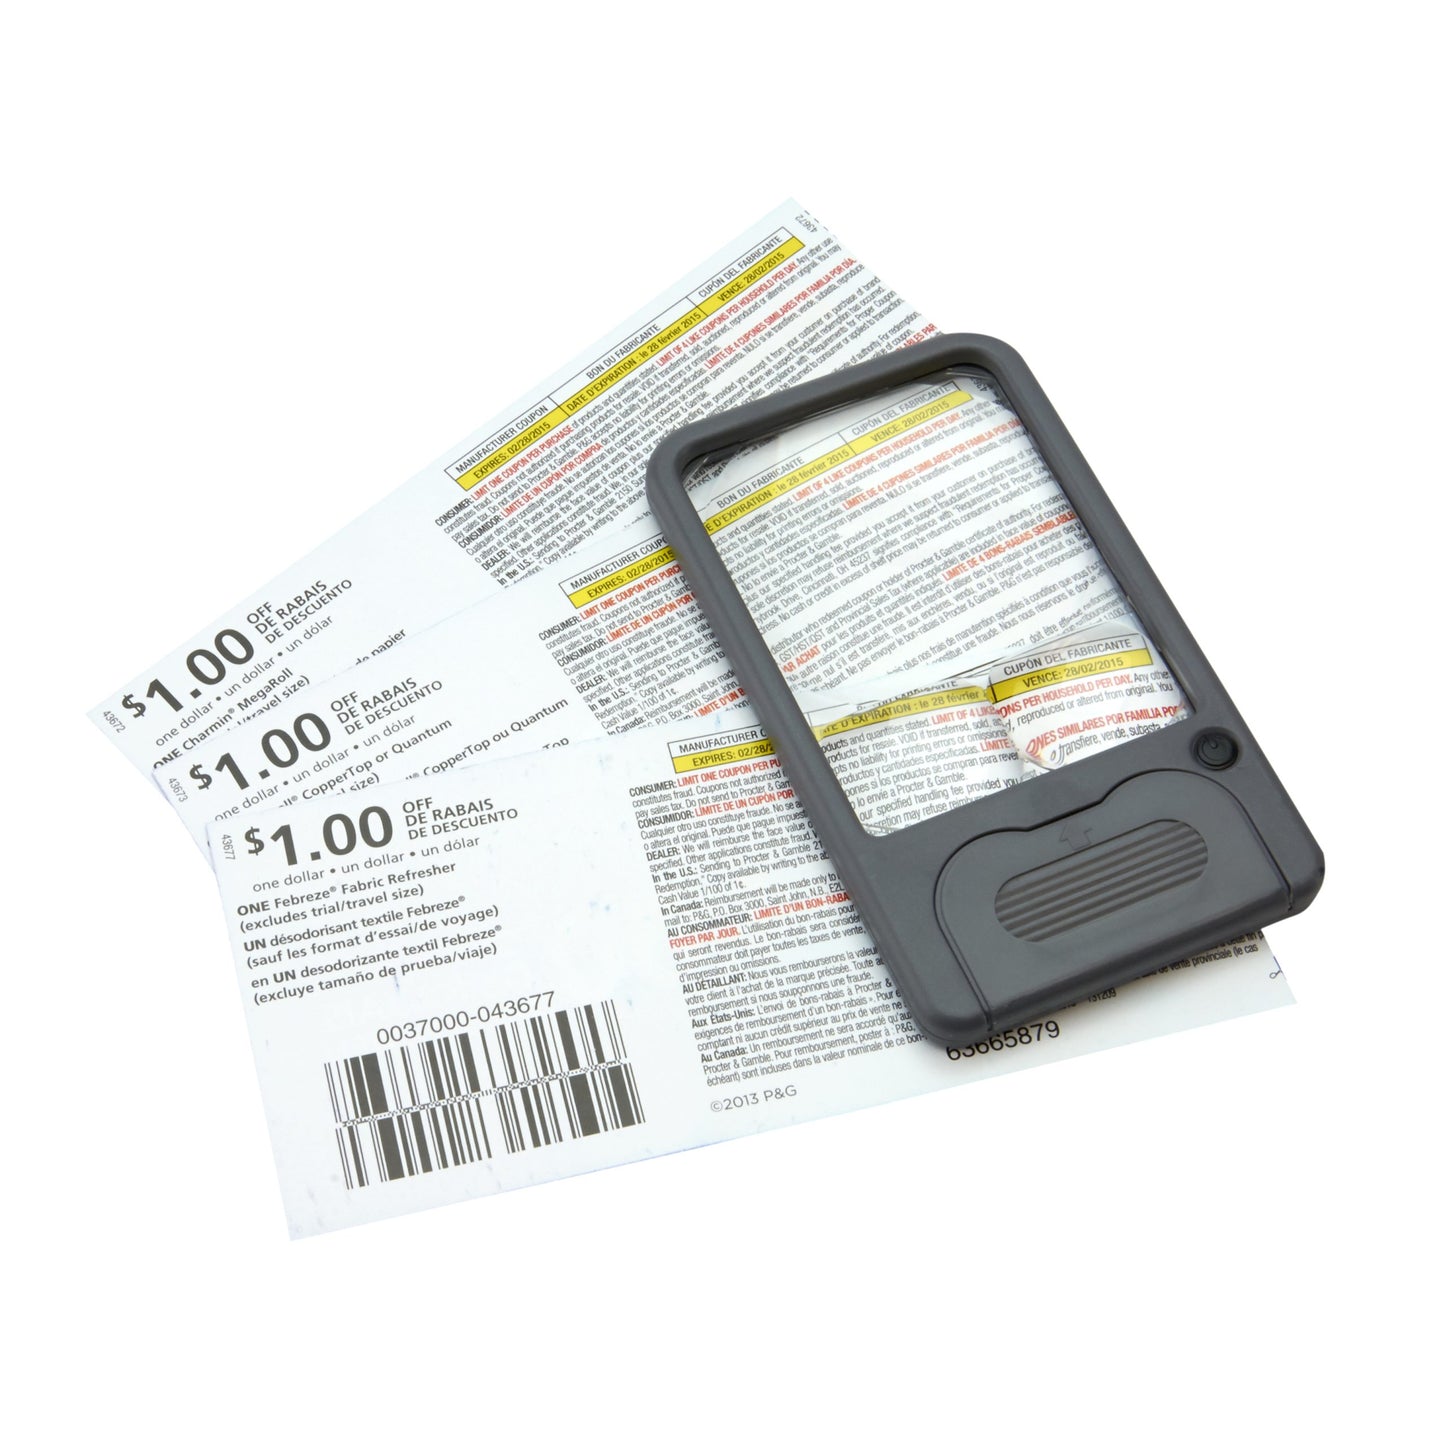 Carson Multi-Power LED Lighted Pocket Magnifier™2.5x, 4.5x and 6x PM-33